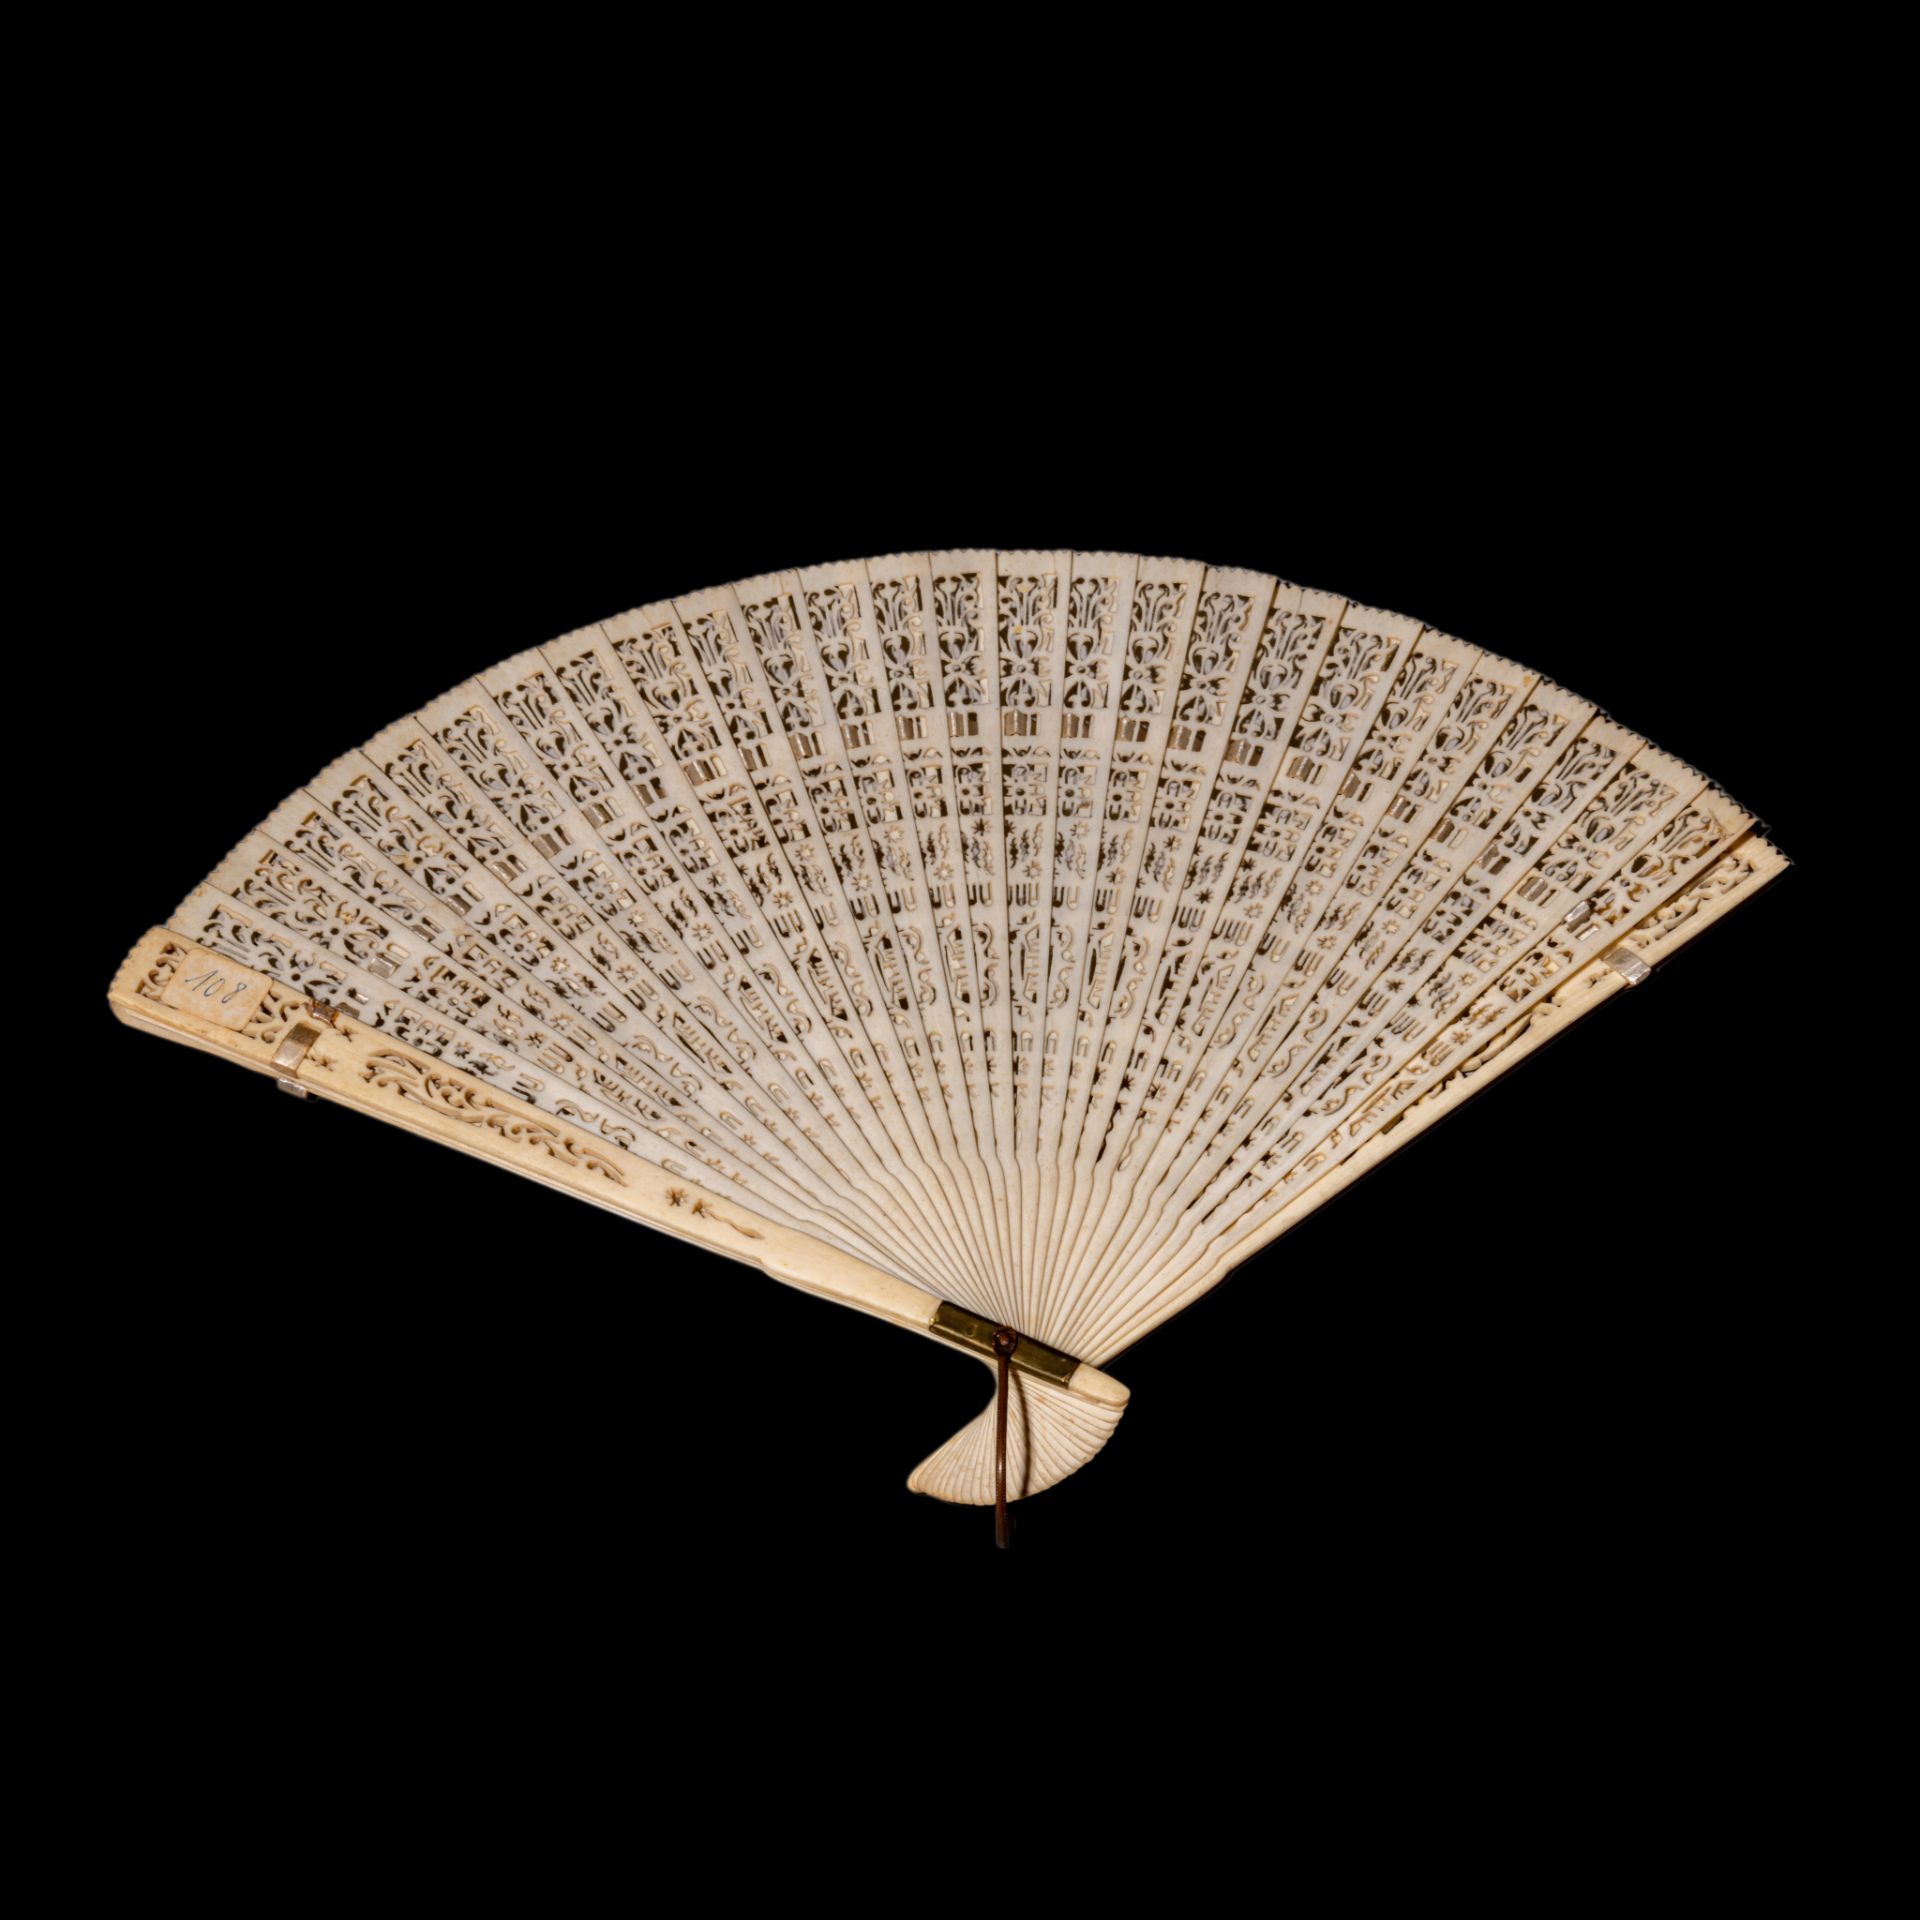 Three Chinese late Qing / early Republic ivory fans, H 16,4 - 19,4 - 20,3 cm / 39 - 77 - 54 g. - W f - Bild 8 aus 12